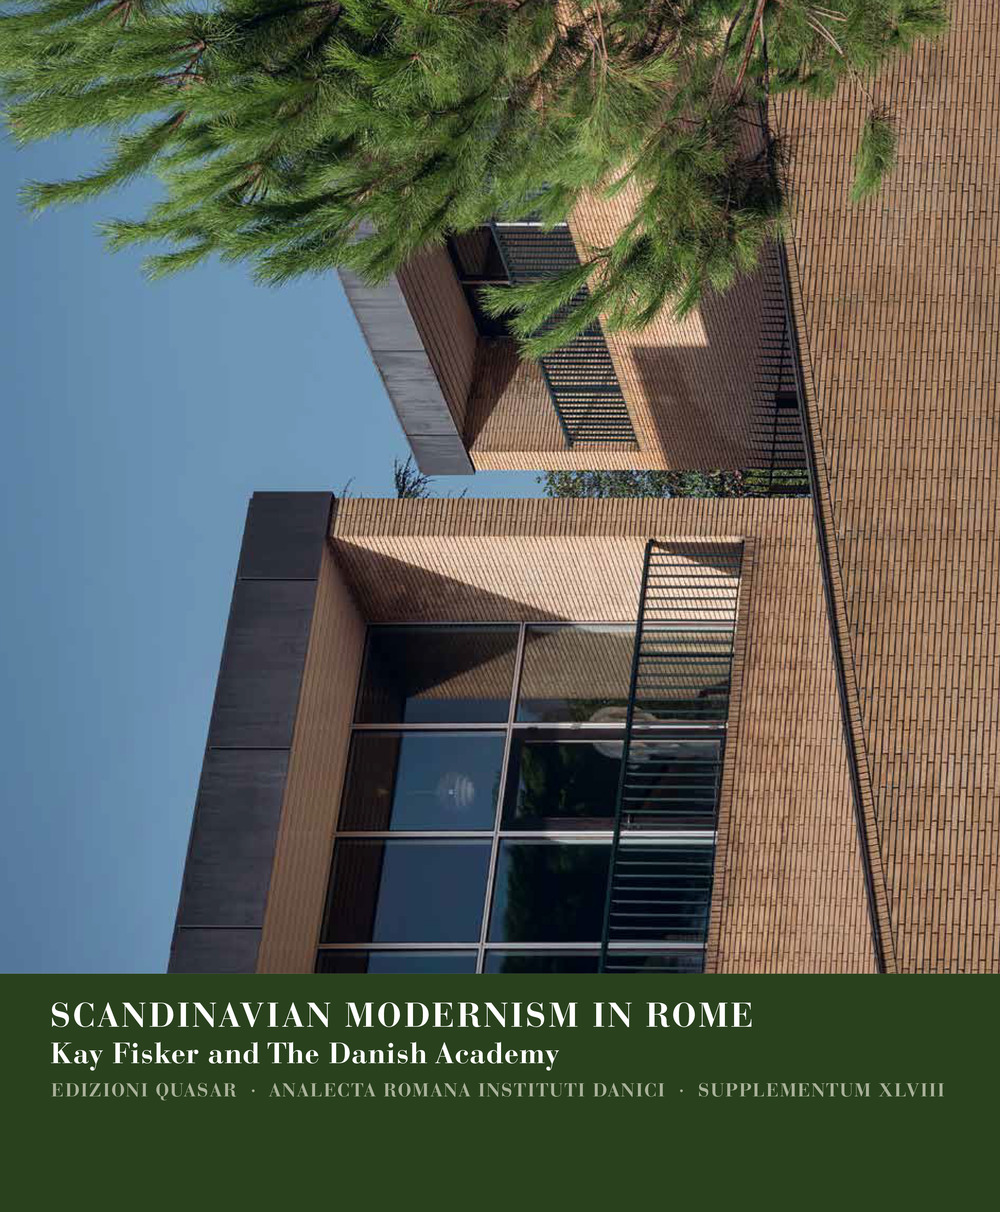 Scandinavian modernism in Rome. Kay Fisher and the Danish Academy